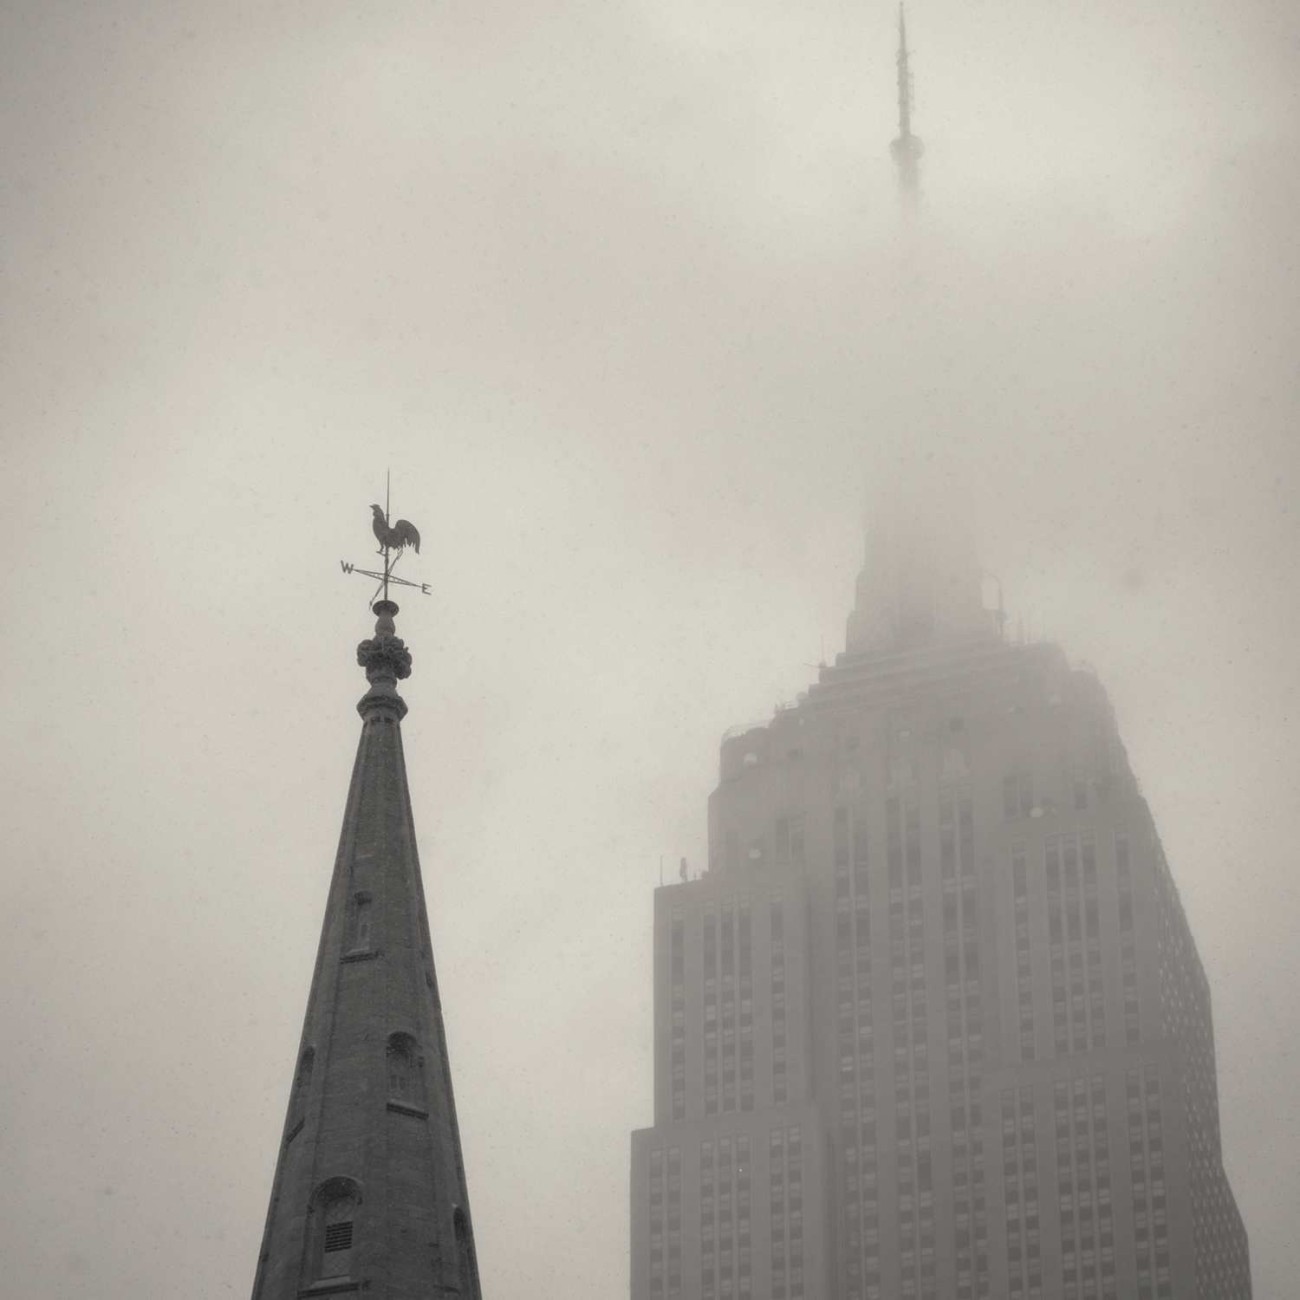 Empire State Building and steeple in fog, NY, 2014